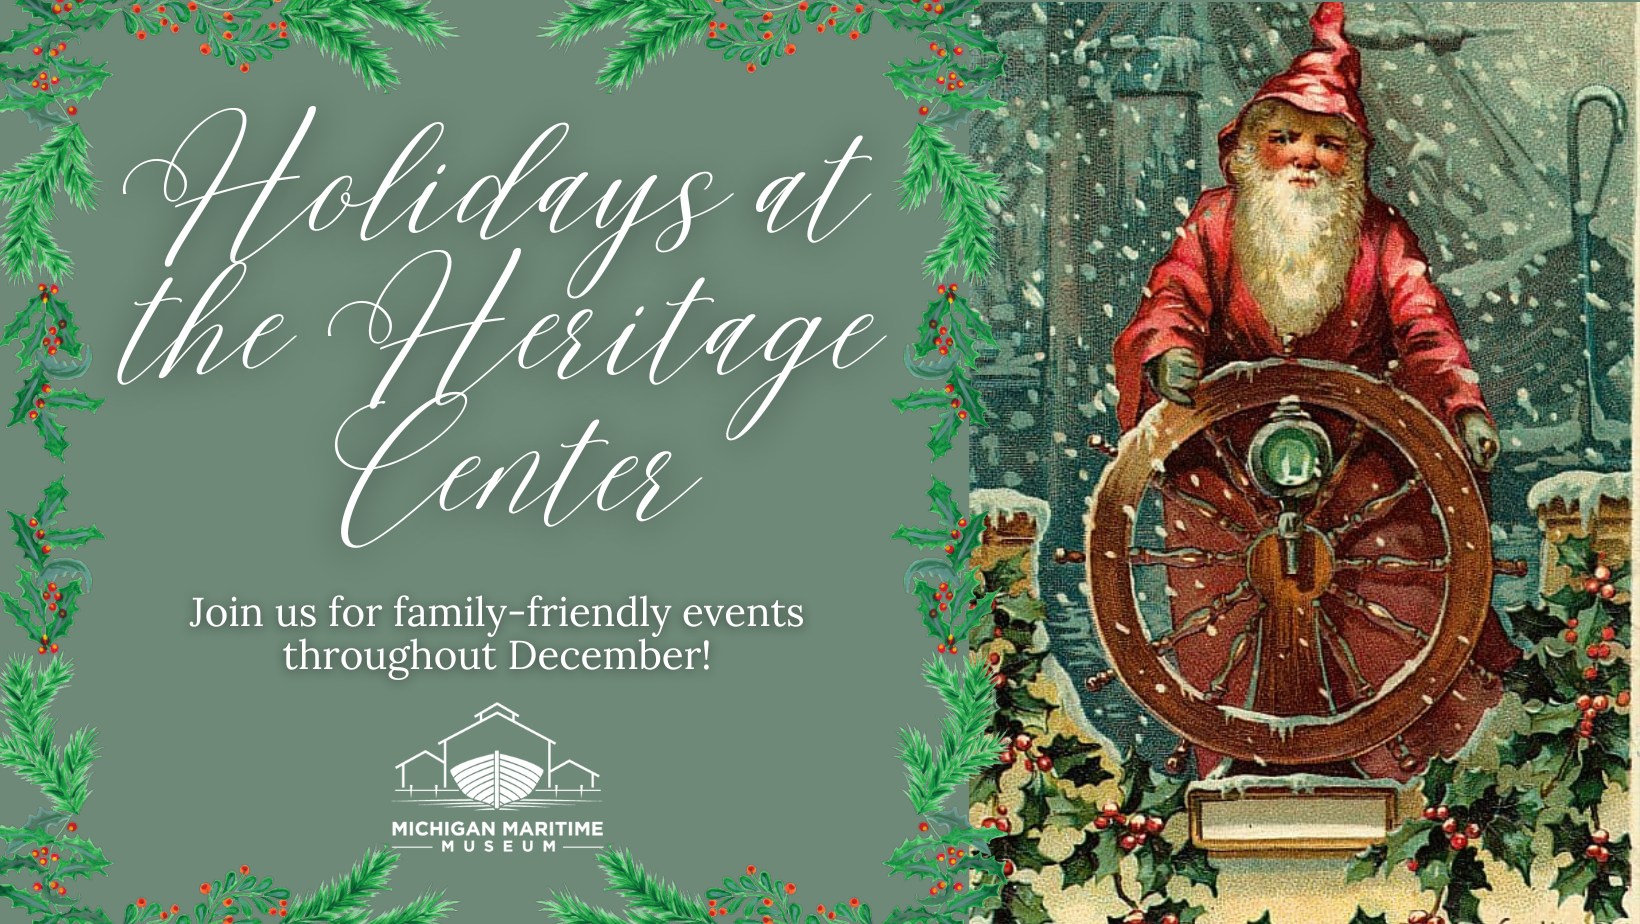 Celebrate the Holidays at the Michigan Maritime Museum